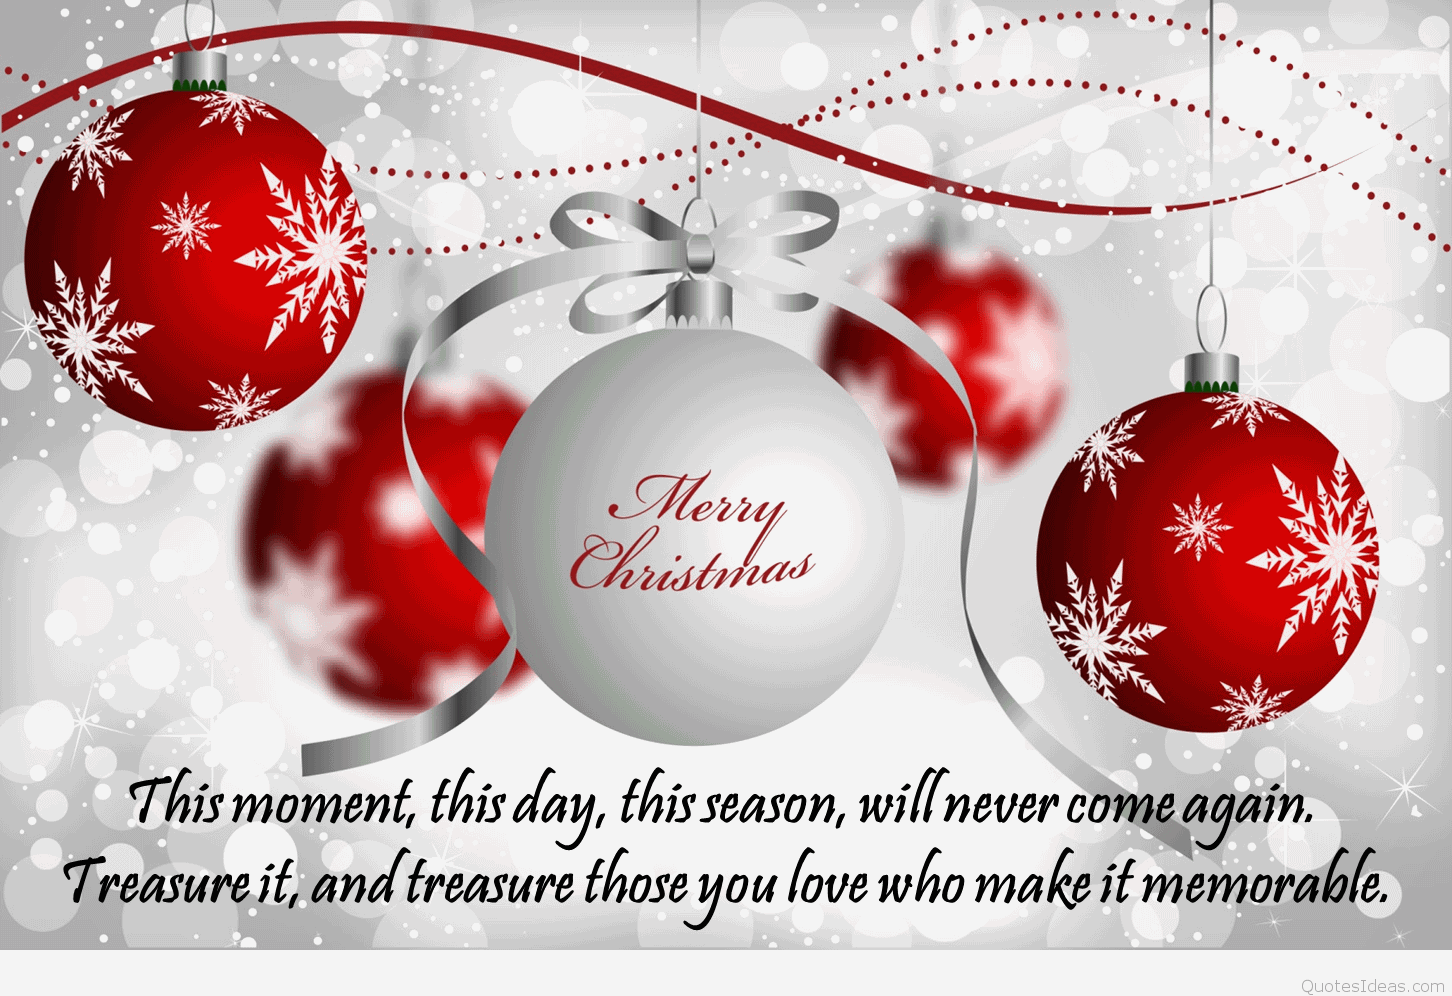 20 Christmas Quotes For Family With Images & Photos